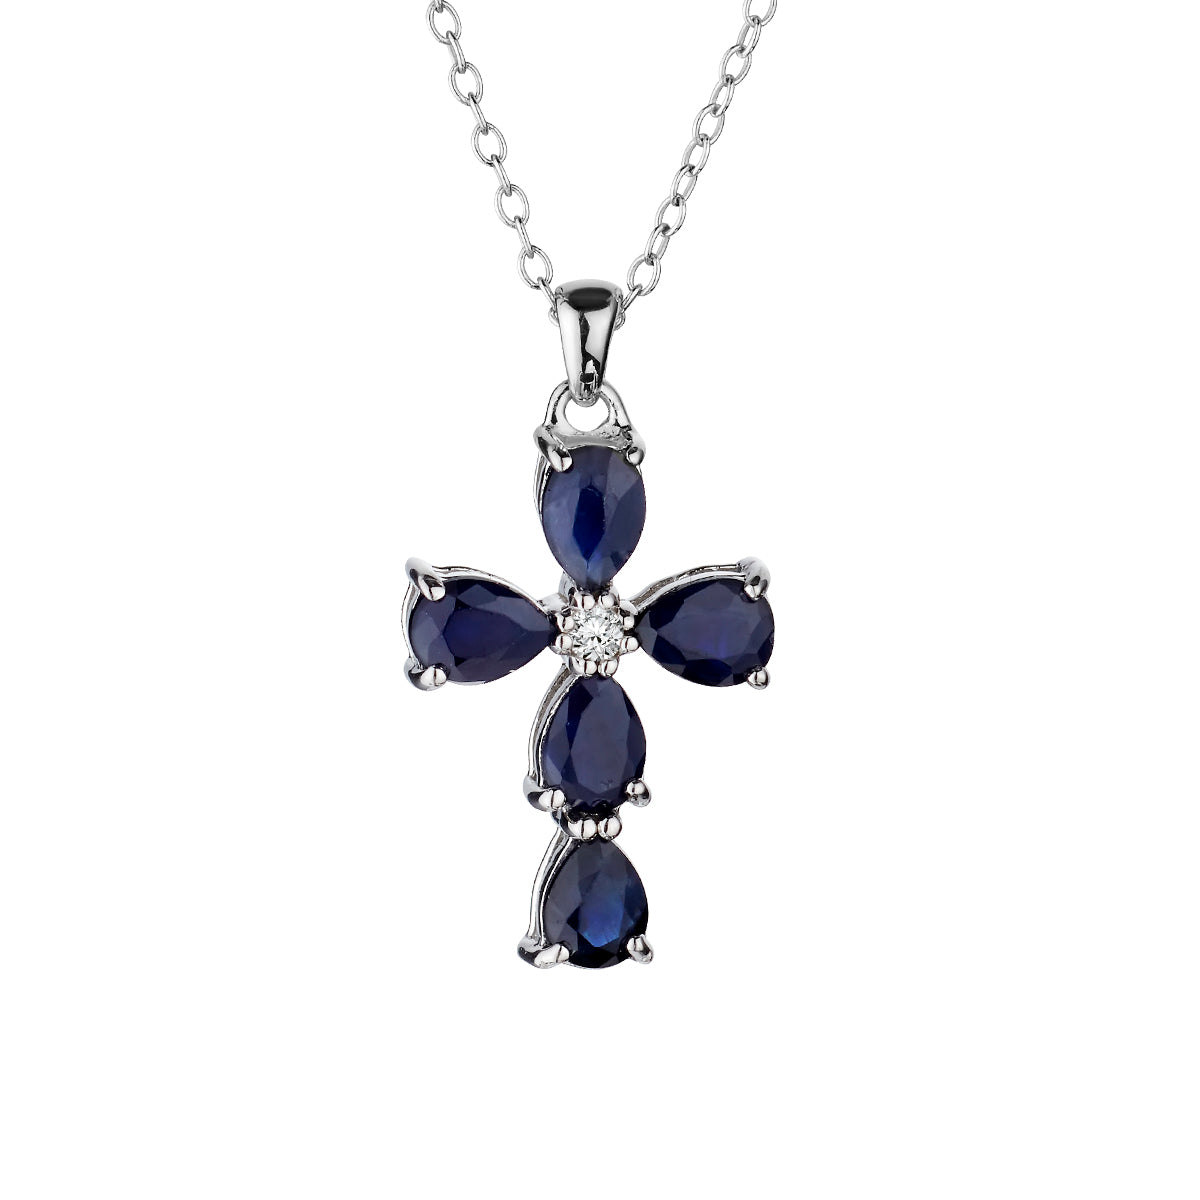 .75 Carat Genuine Sapphire and White Zircon Cross Pendant, Sterling Silver.......................NOW